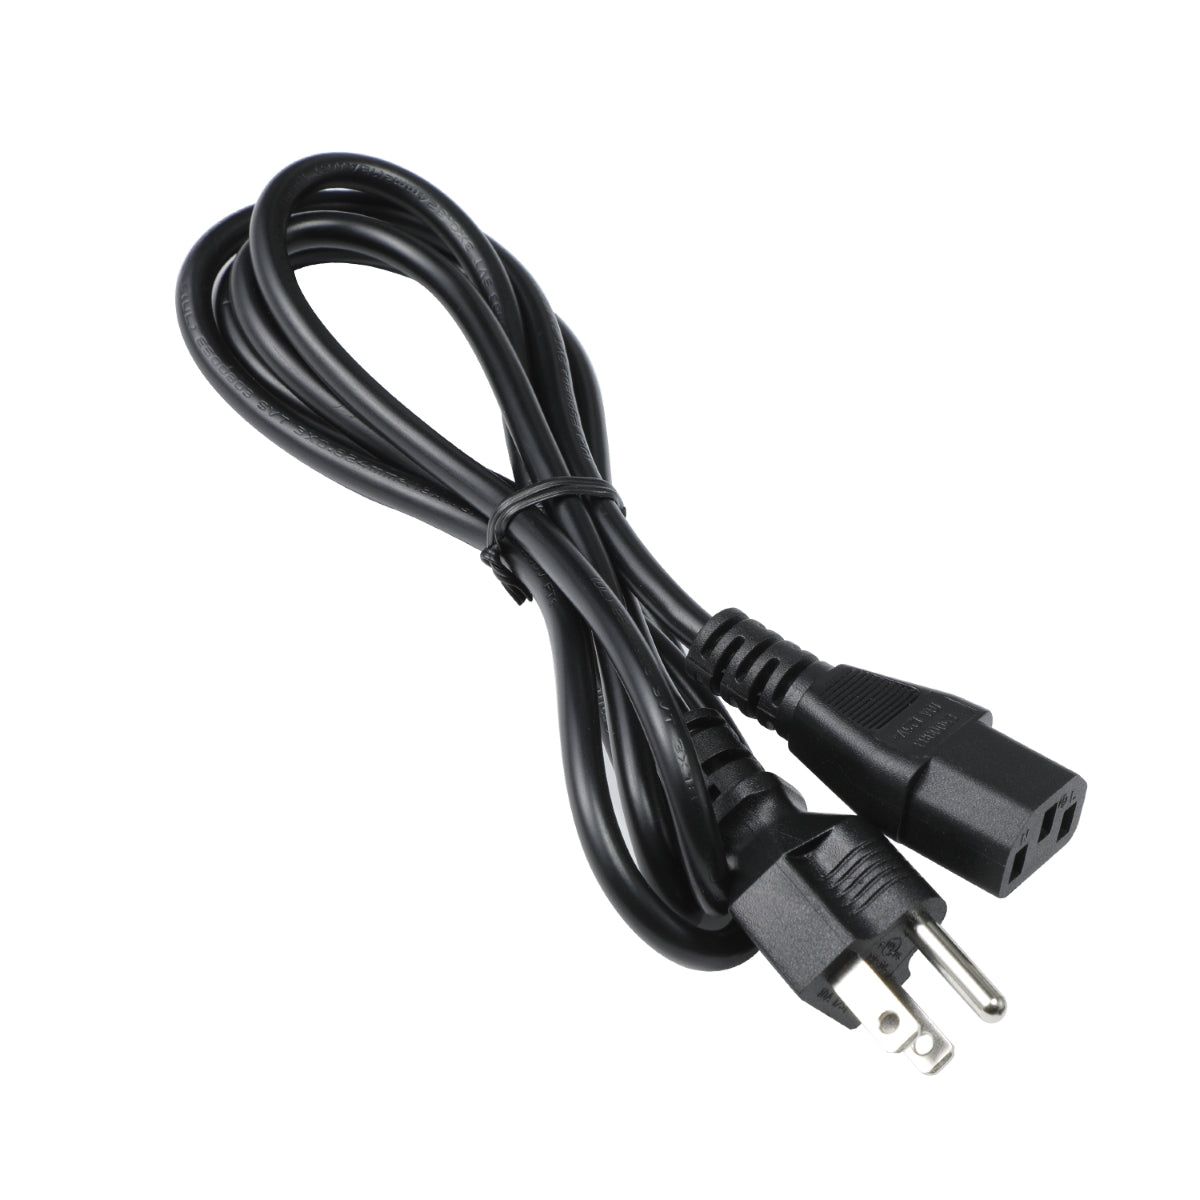 Power Cord for ViewSonic VG2249 Display Monitor.